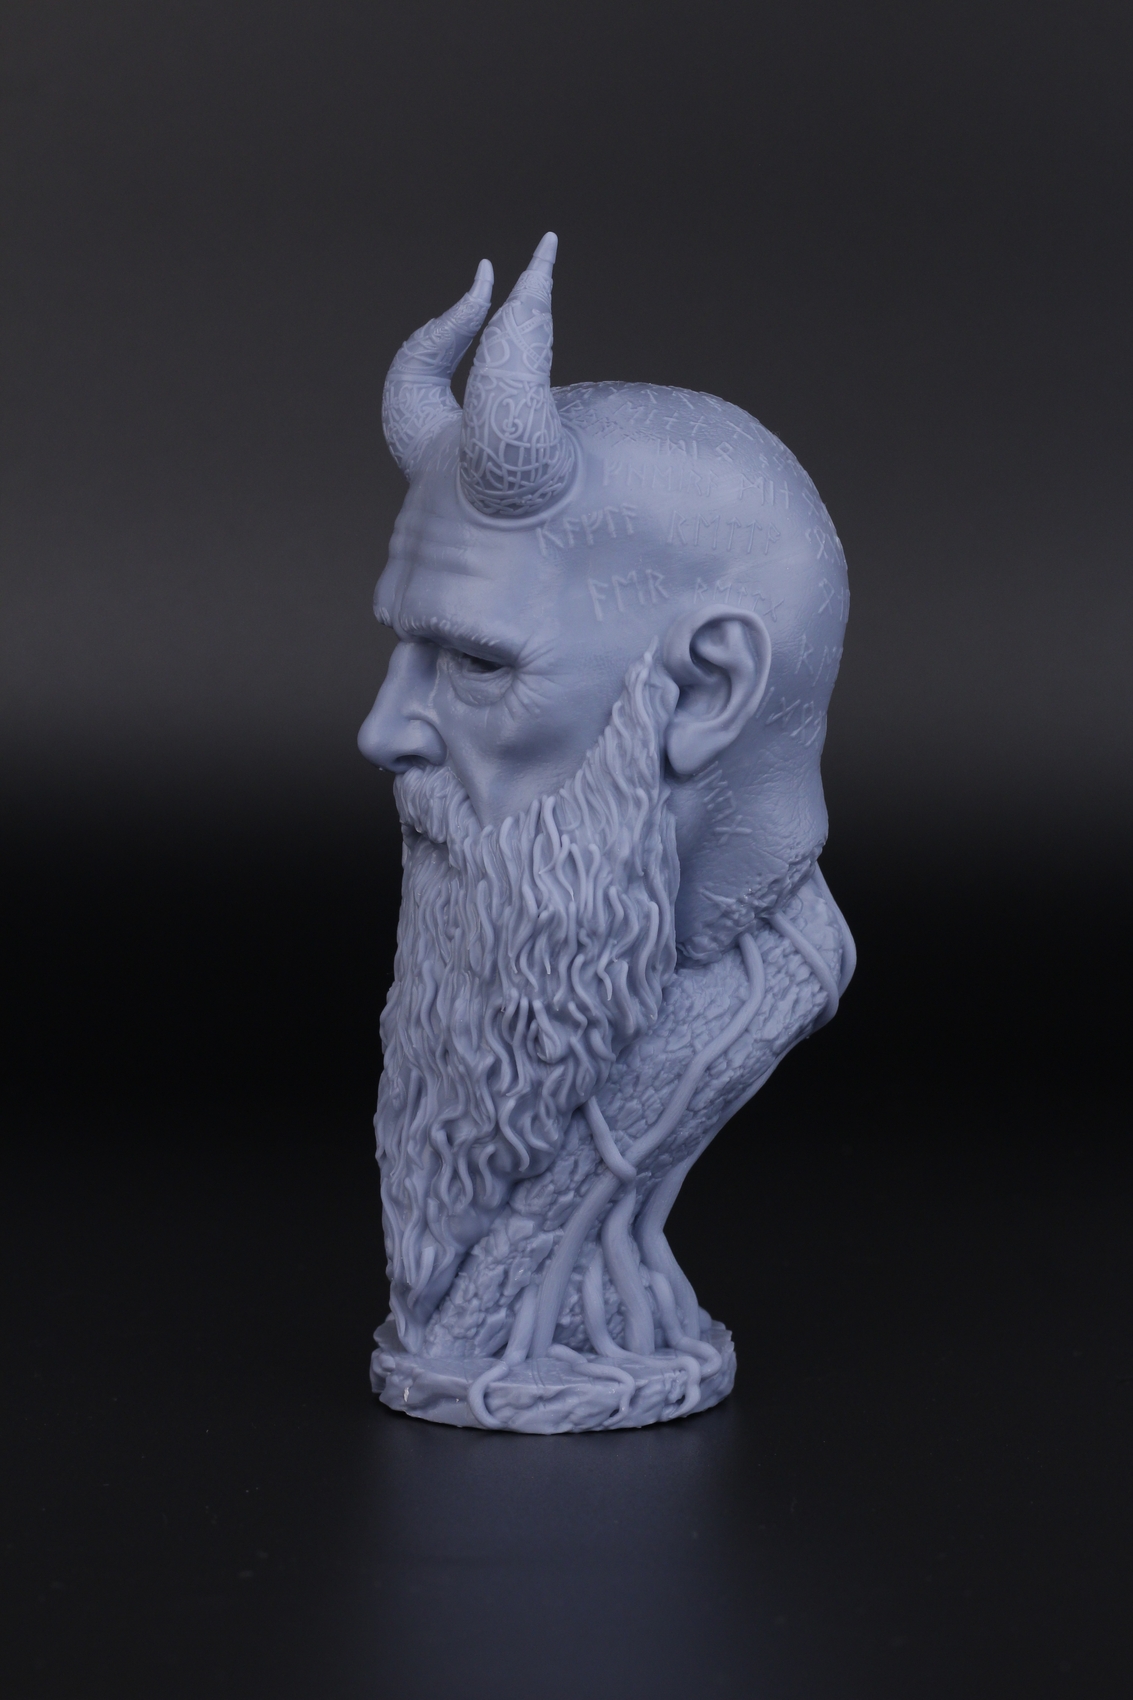 Mimir Bust from Fotis Mint printed on Anycubic Photon M33 | Anycubic Photon M3 Review: Bridging the gap